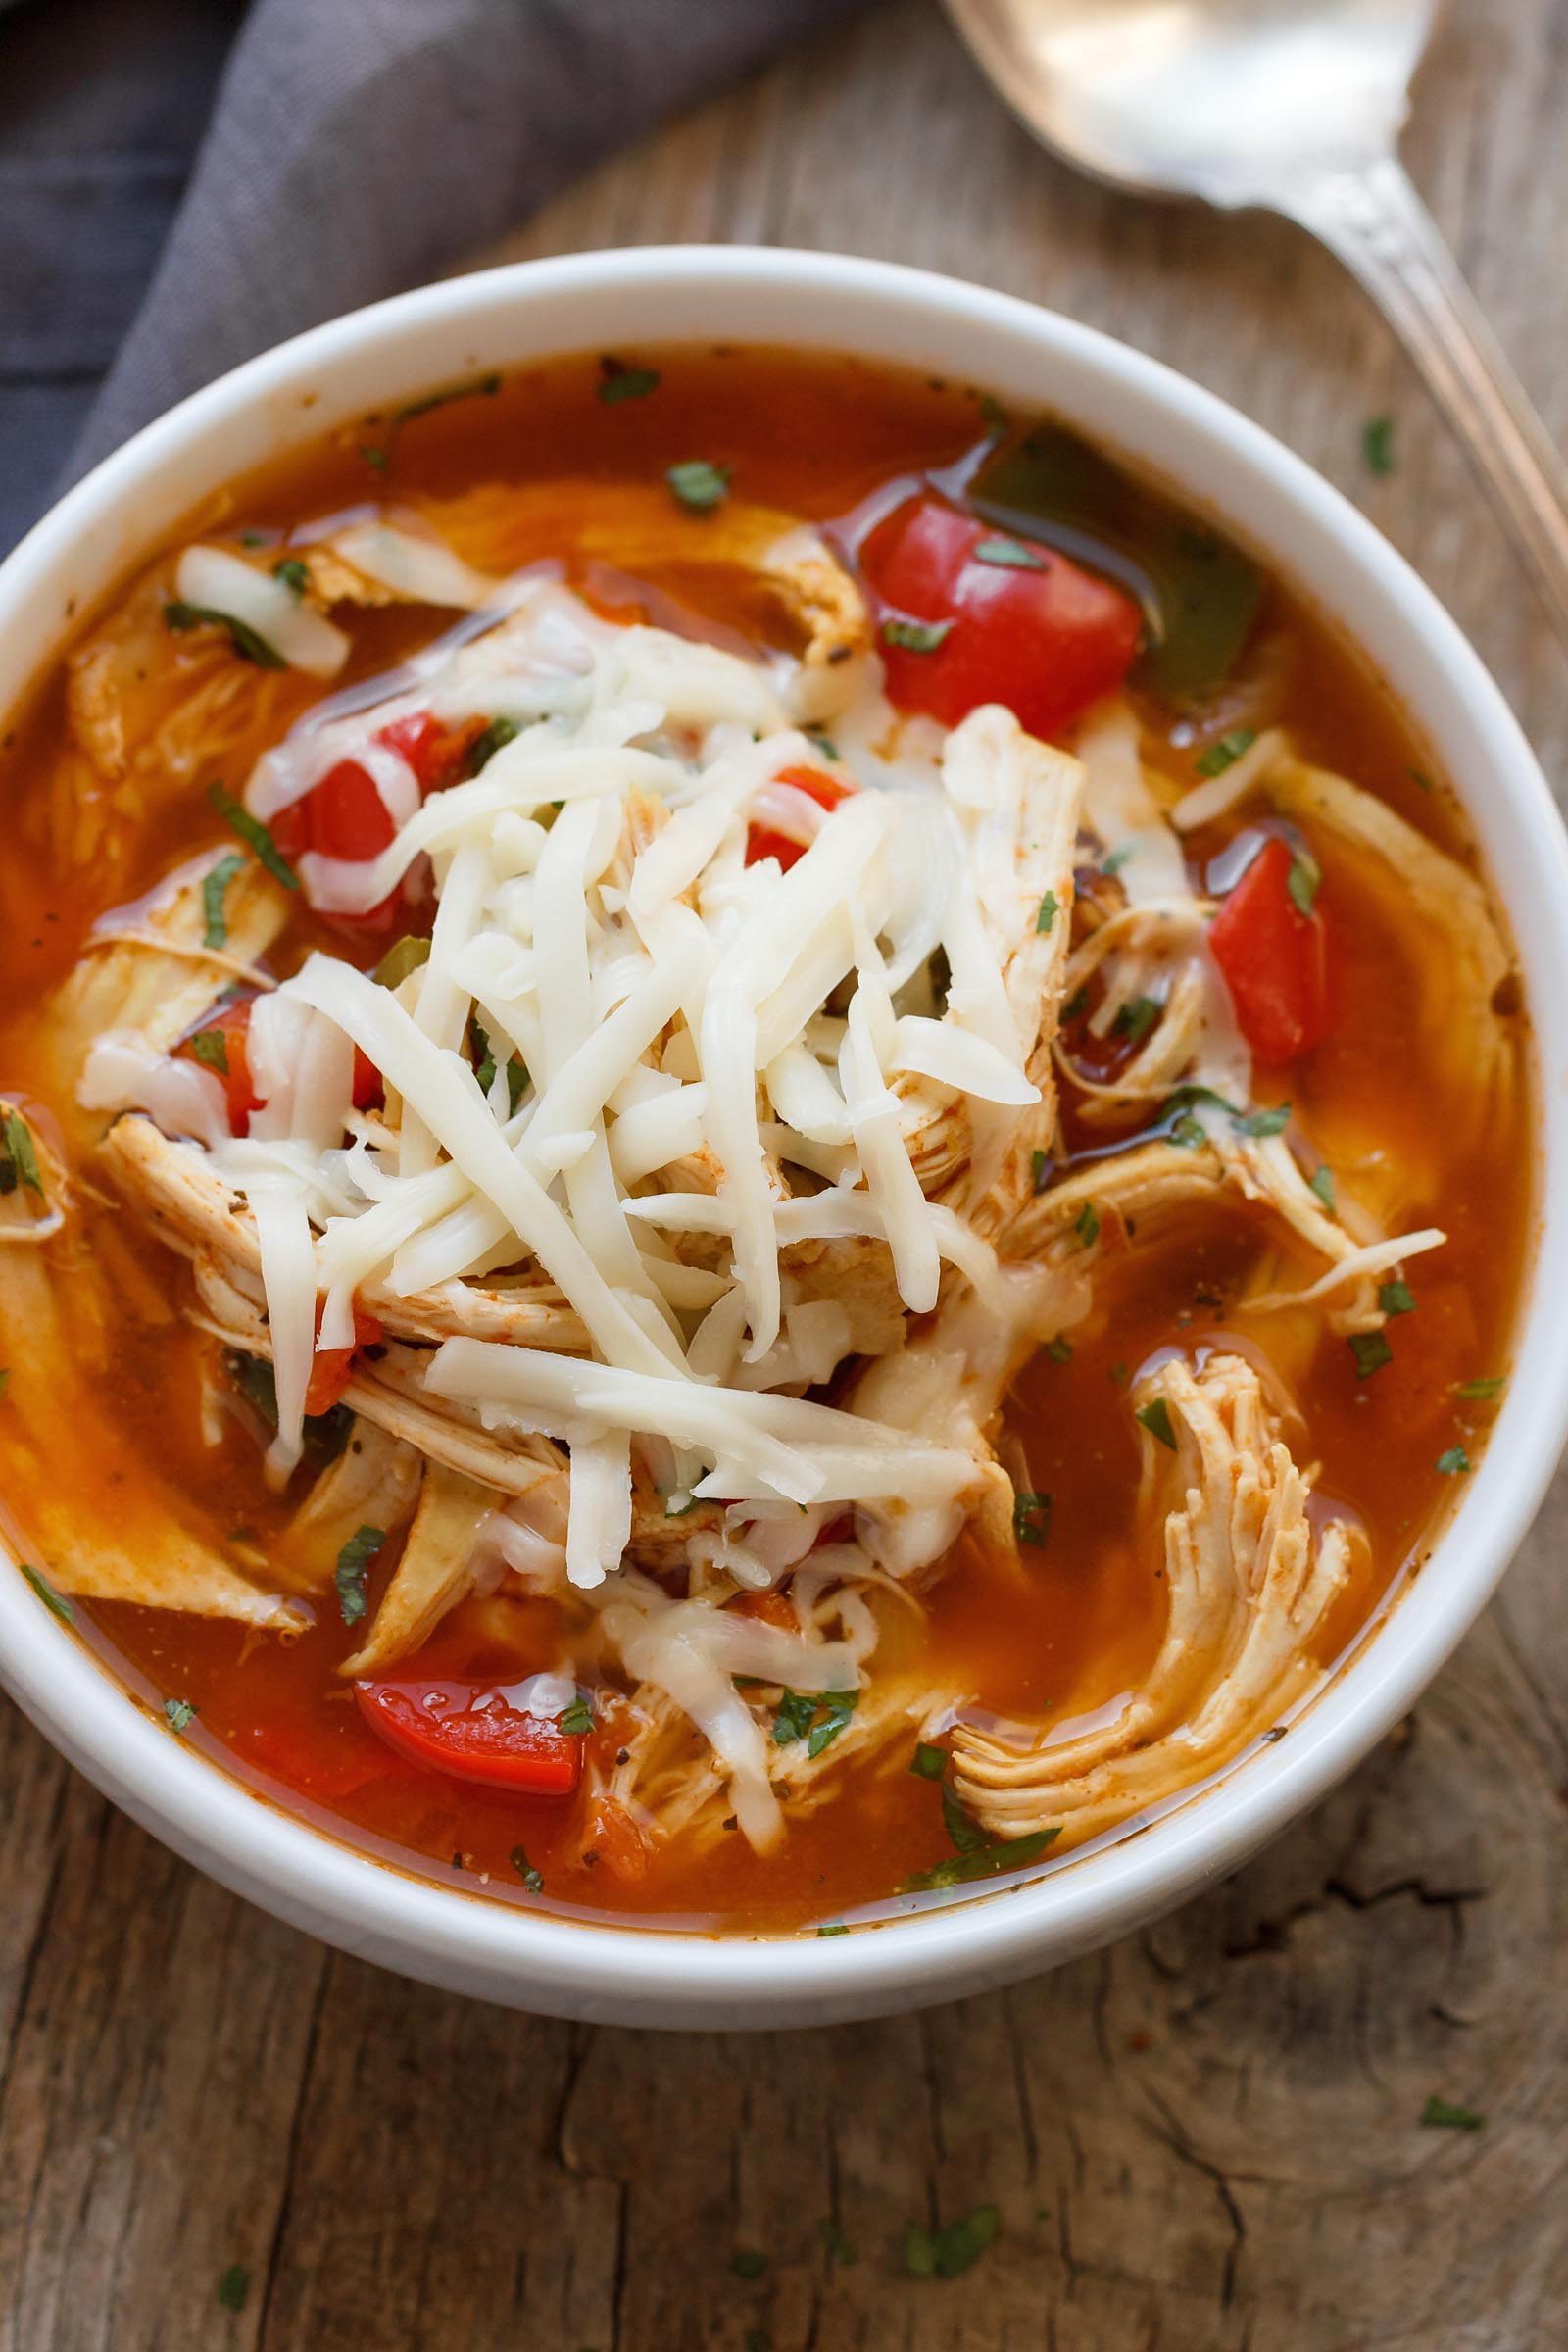 Instant Pot Fajita Chicken Soup Recipe - #eatwell101,#recipe The perfect #chicken #soup for a busy day and the #InstantPot makes it even simpler!